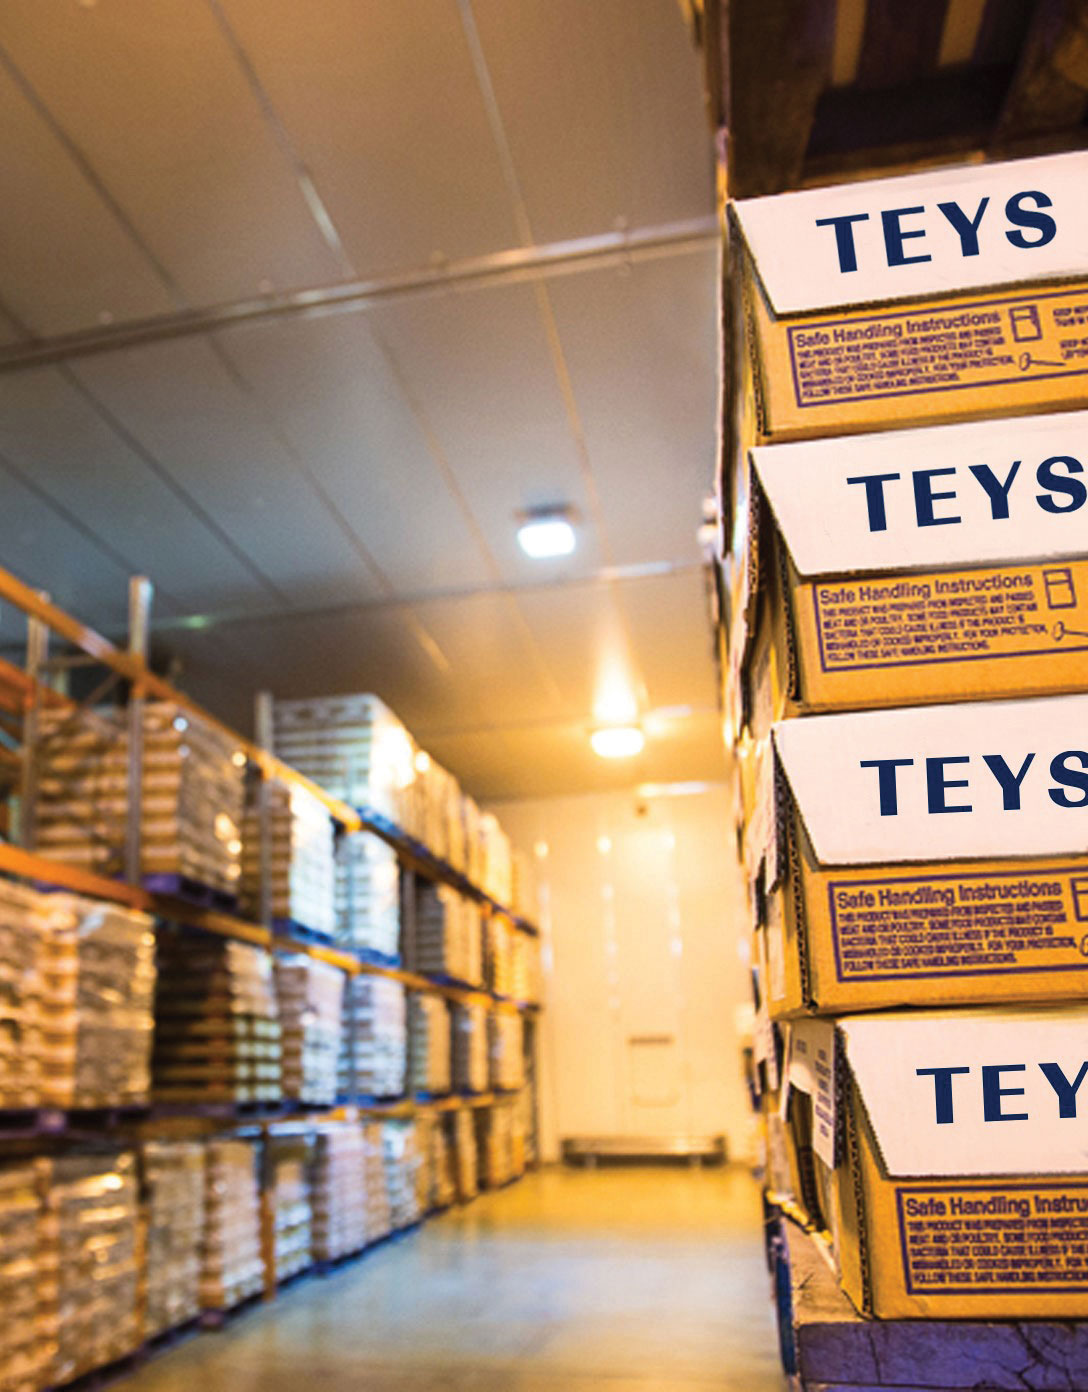 Teys boxes stacked for supply